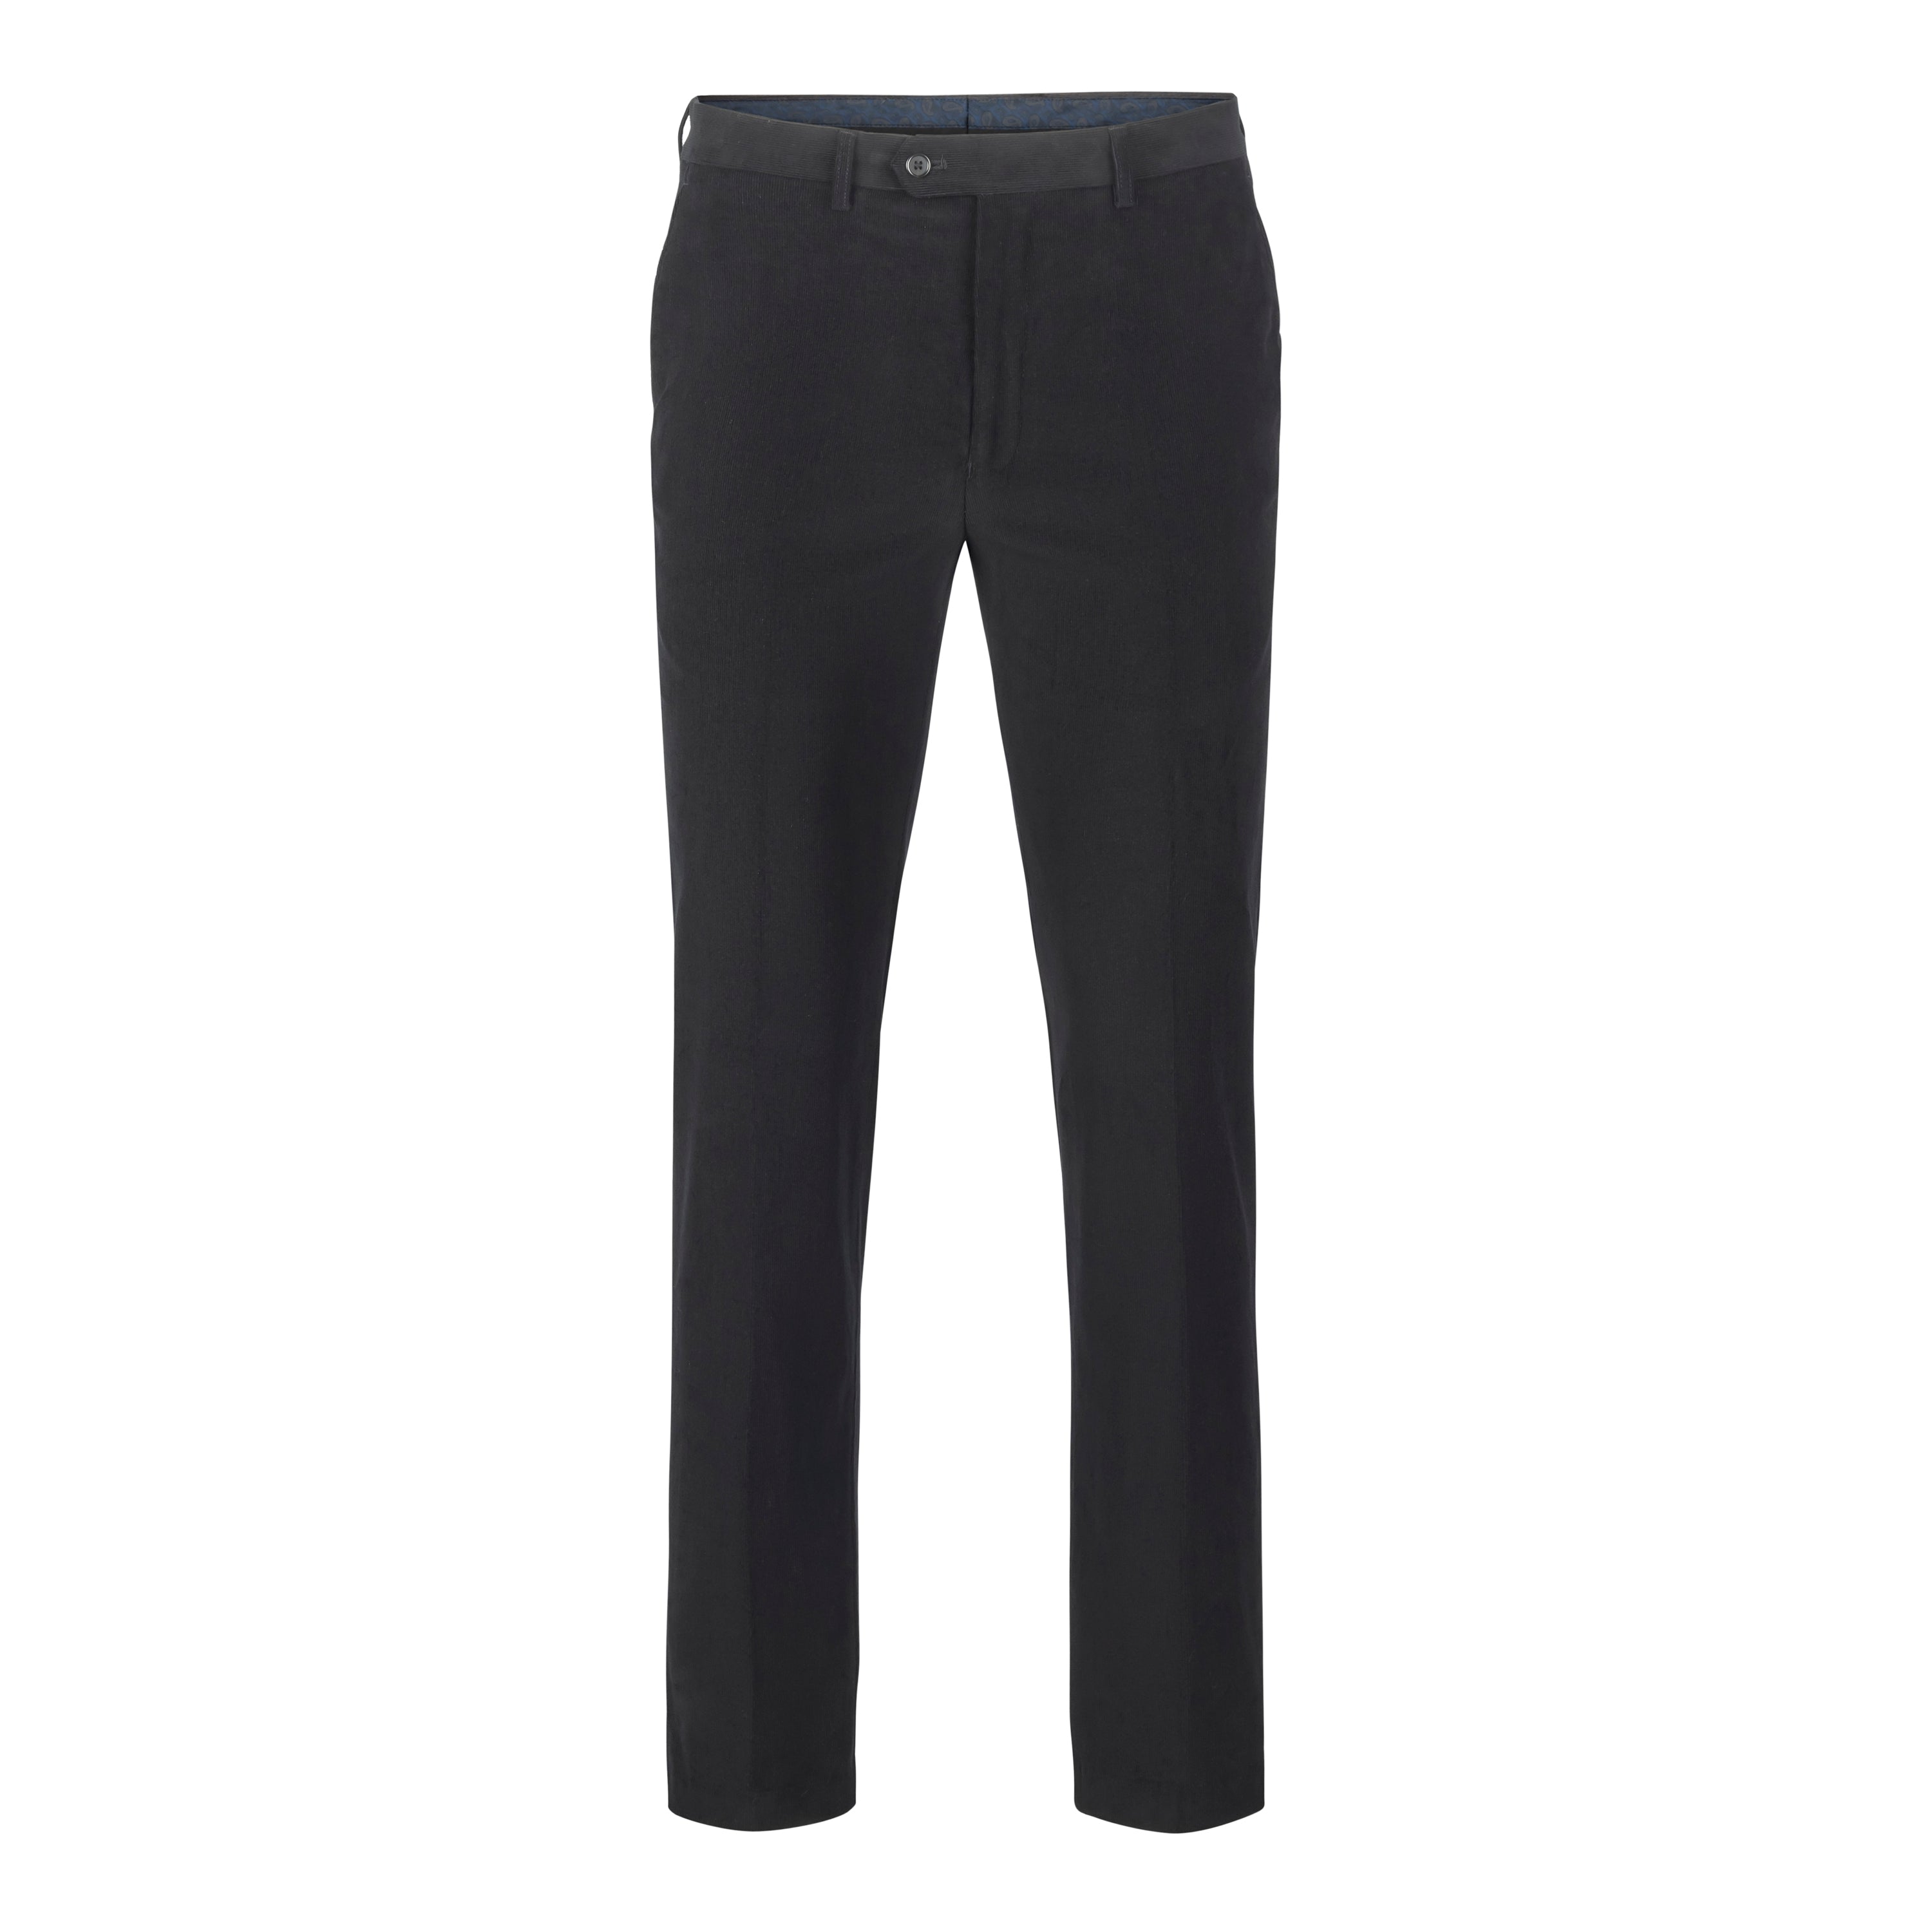 Polo Ralph Lauren slim fit stretch twill chino trousers in black | ASOS